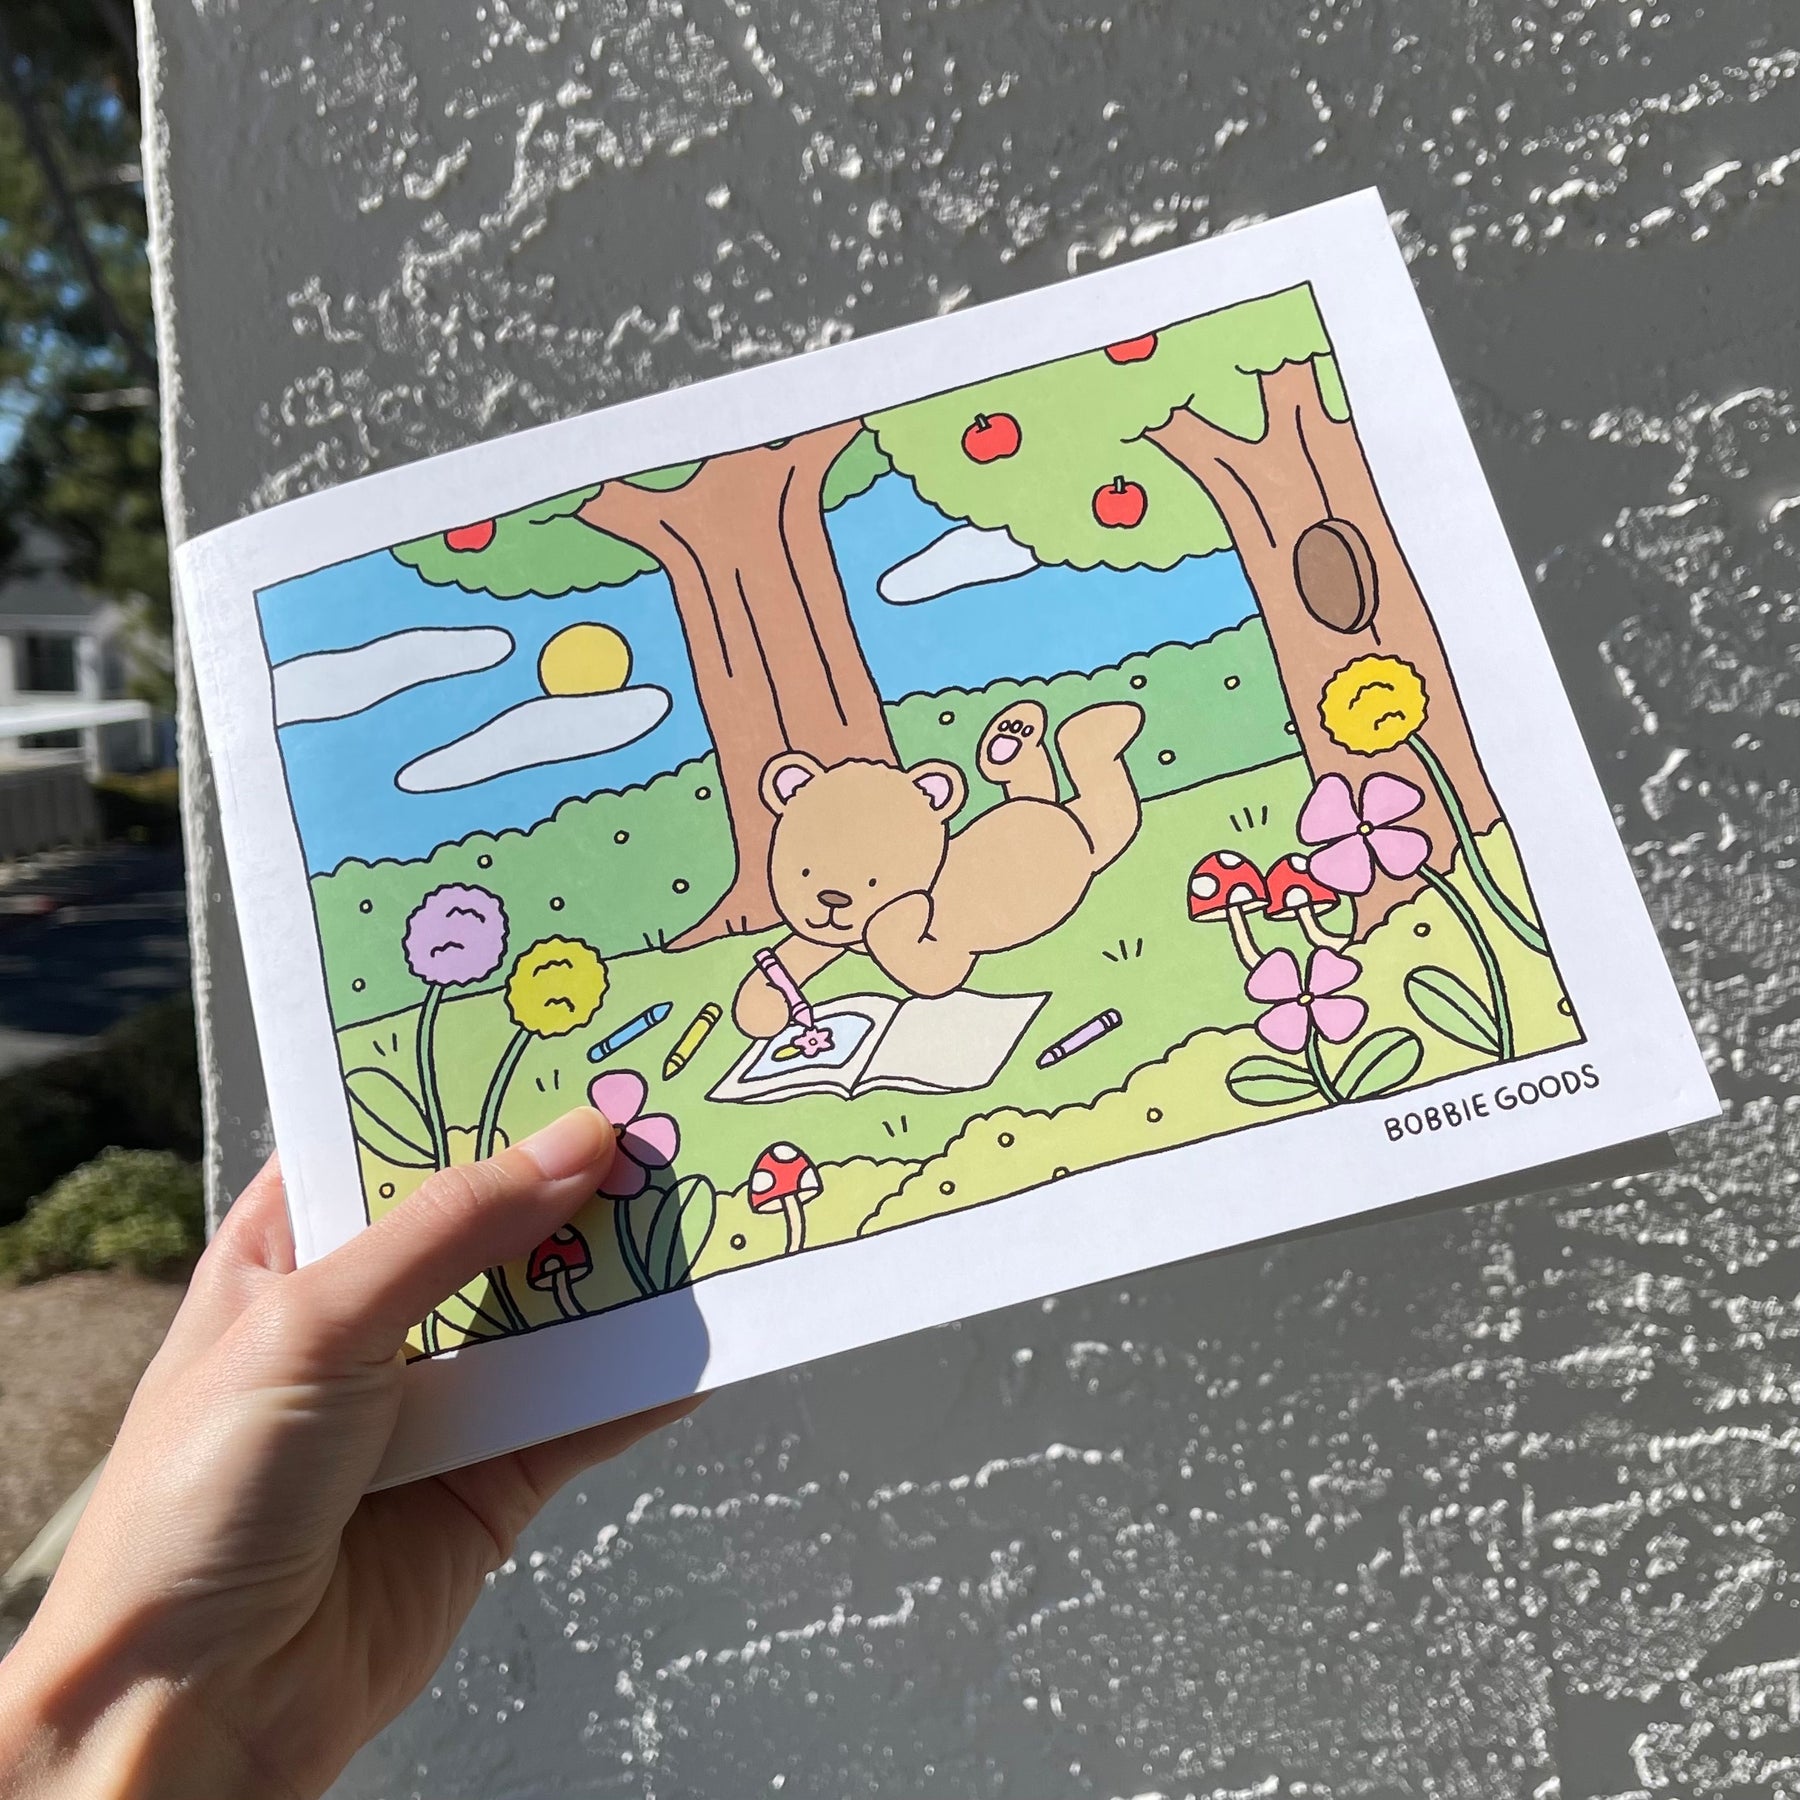 Bobbie Goods Coloring Book: Unofficial Coloring Book for Kids and All Fans.  The boobiegoods Coloring Book for Children and Kids by Thomas publish